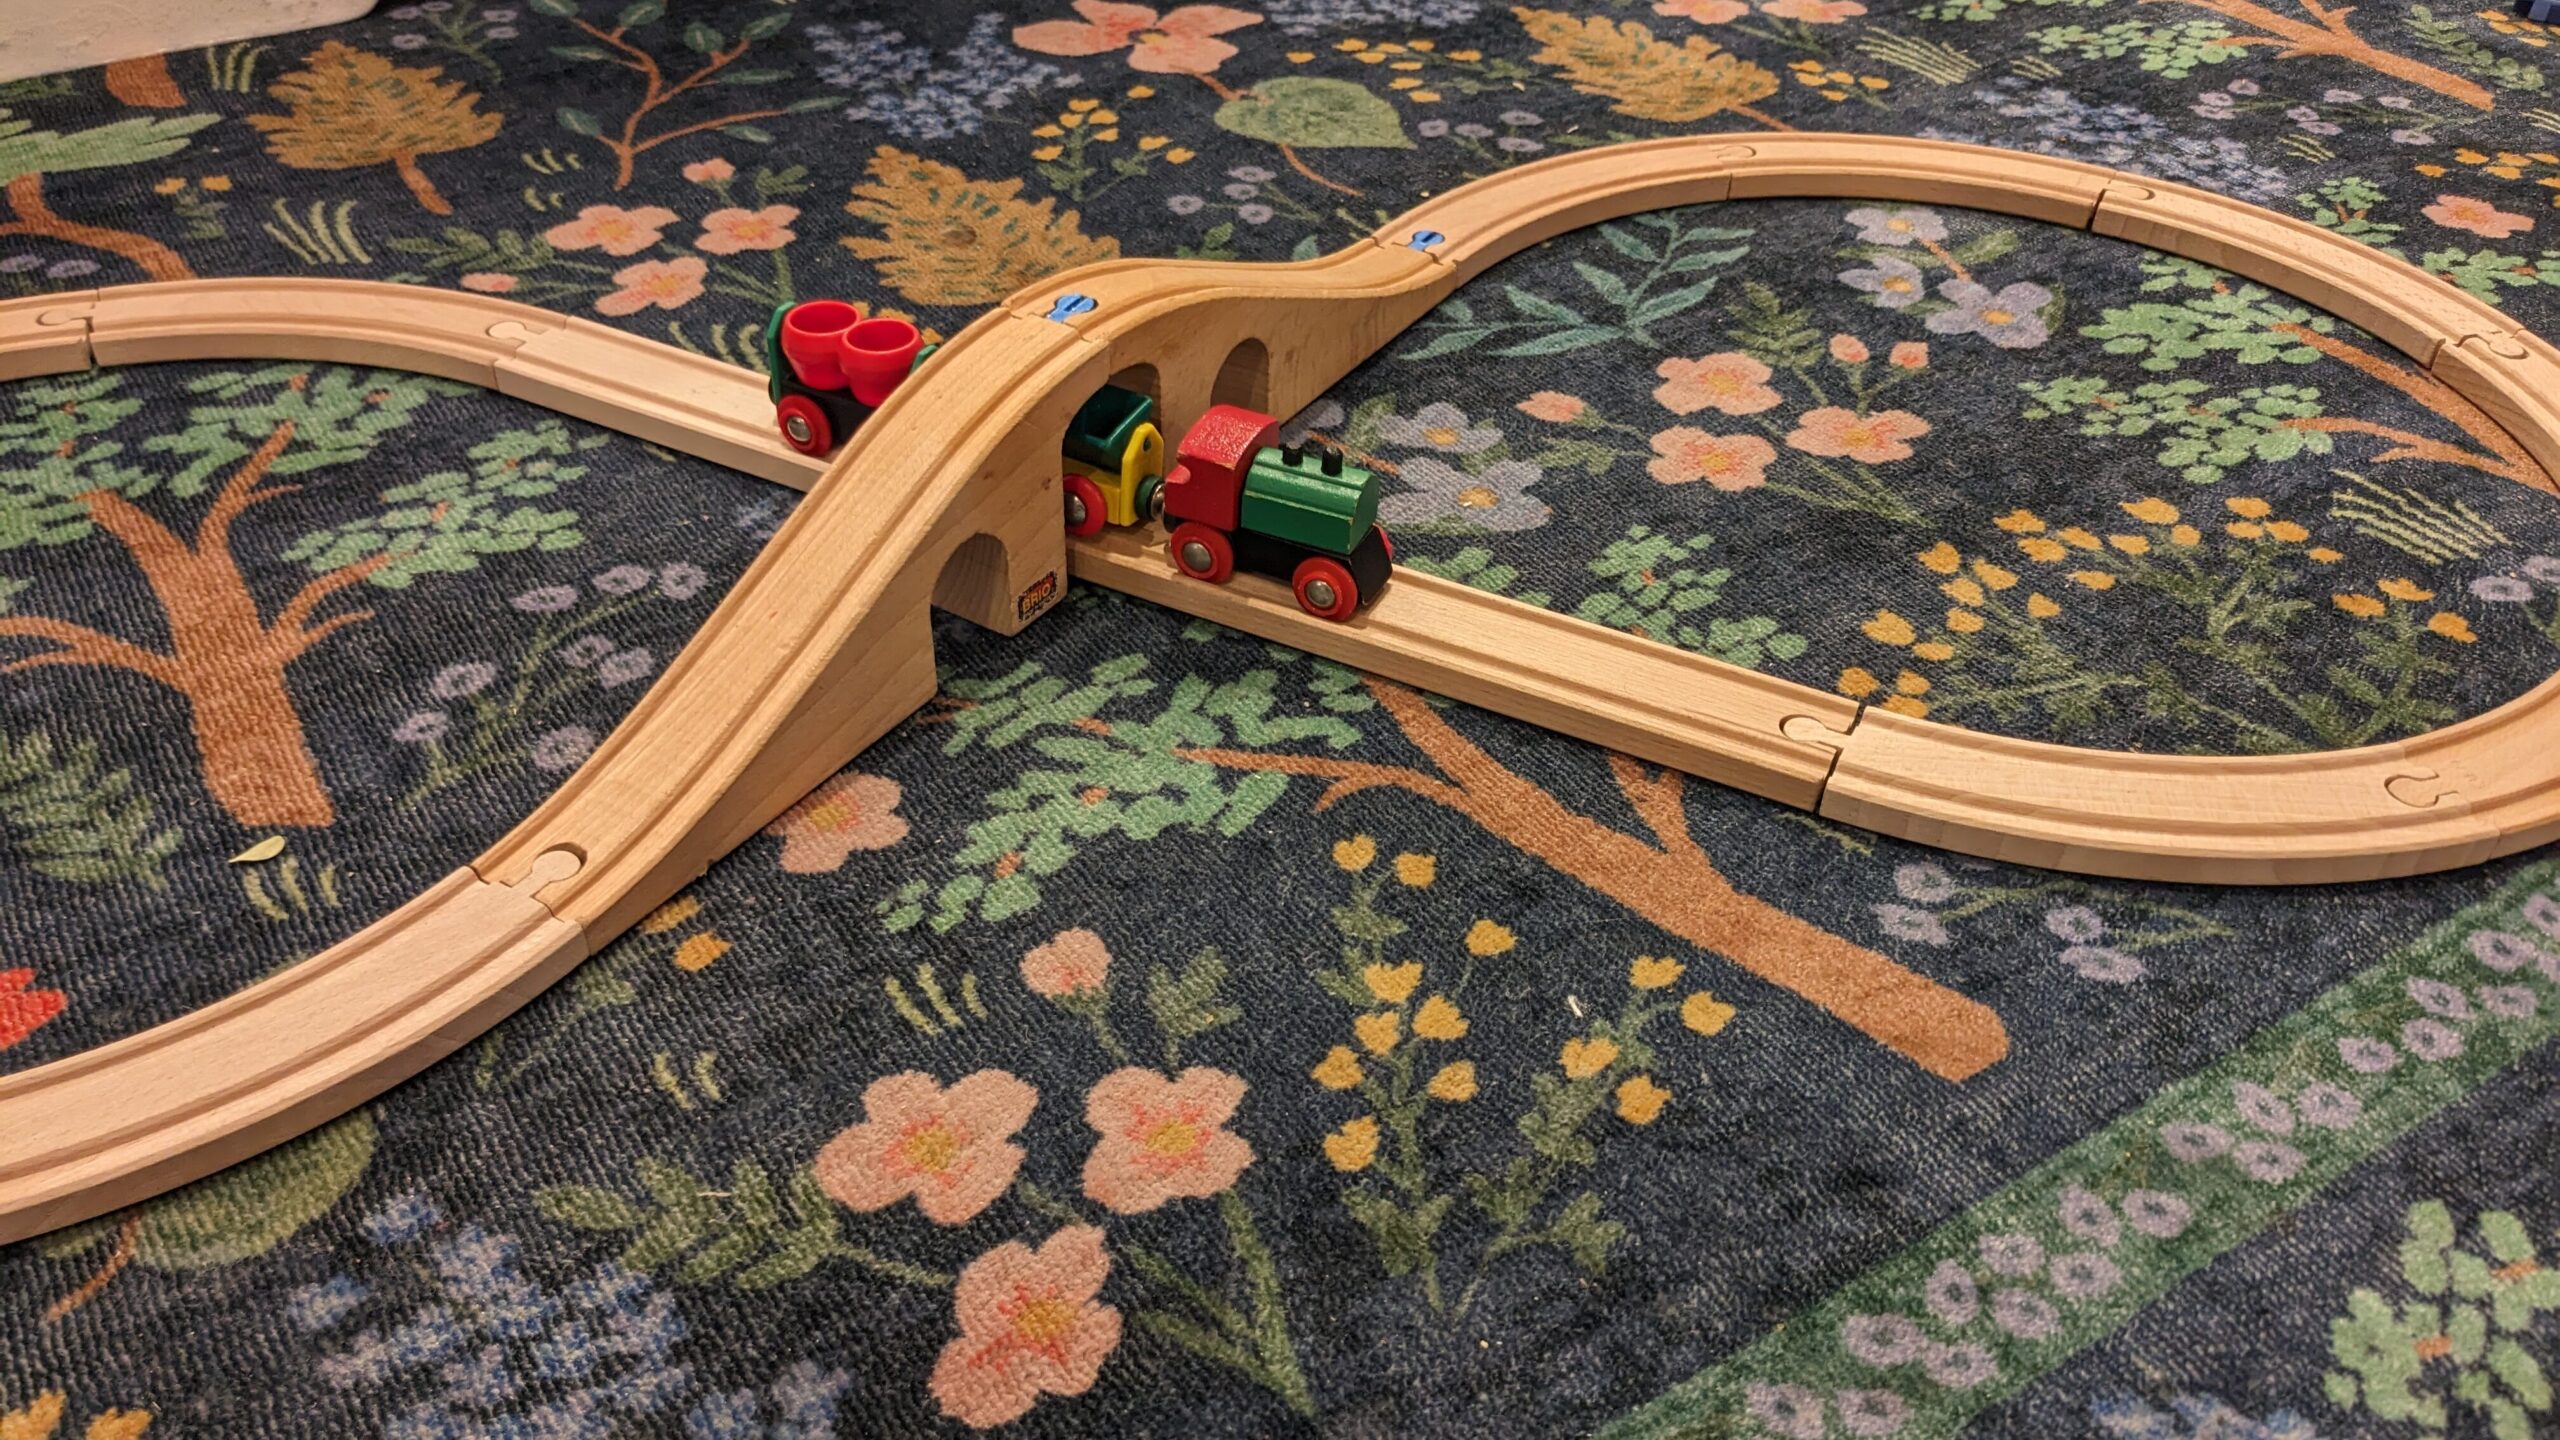 The Brio bridge with its 3d-printed pins in use in a classic figure-eight patten.